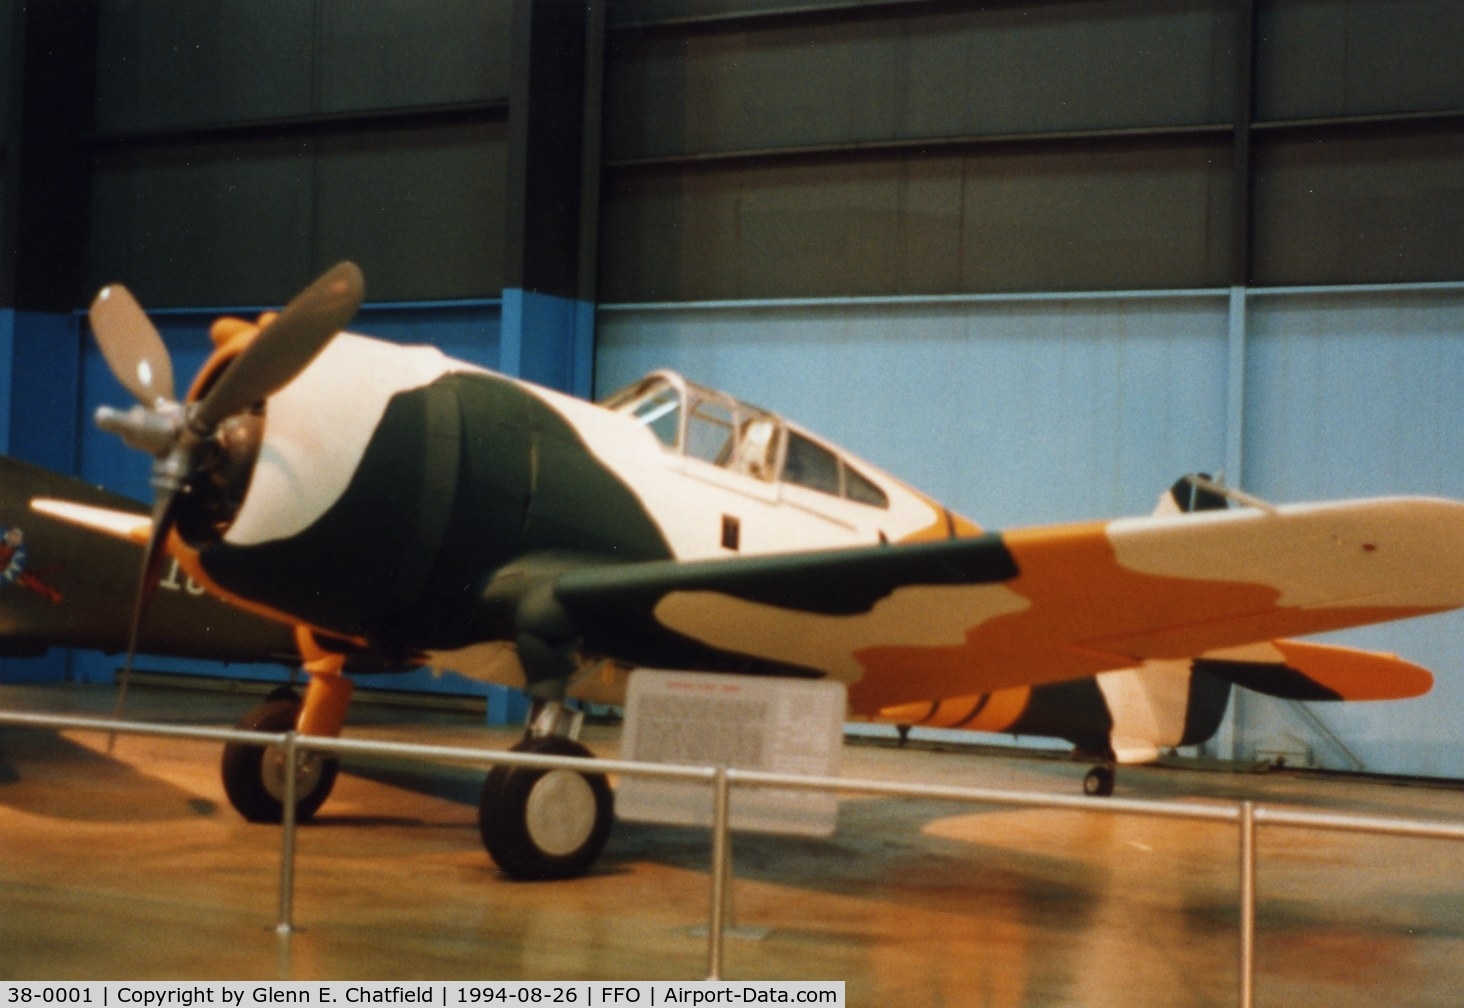 38-0001, 1938 Curtiss P-36 Hawk C/N 12415, P-36A Hawk at the National Museum of the U.S. Air Force. Old paint scheme